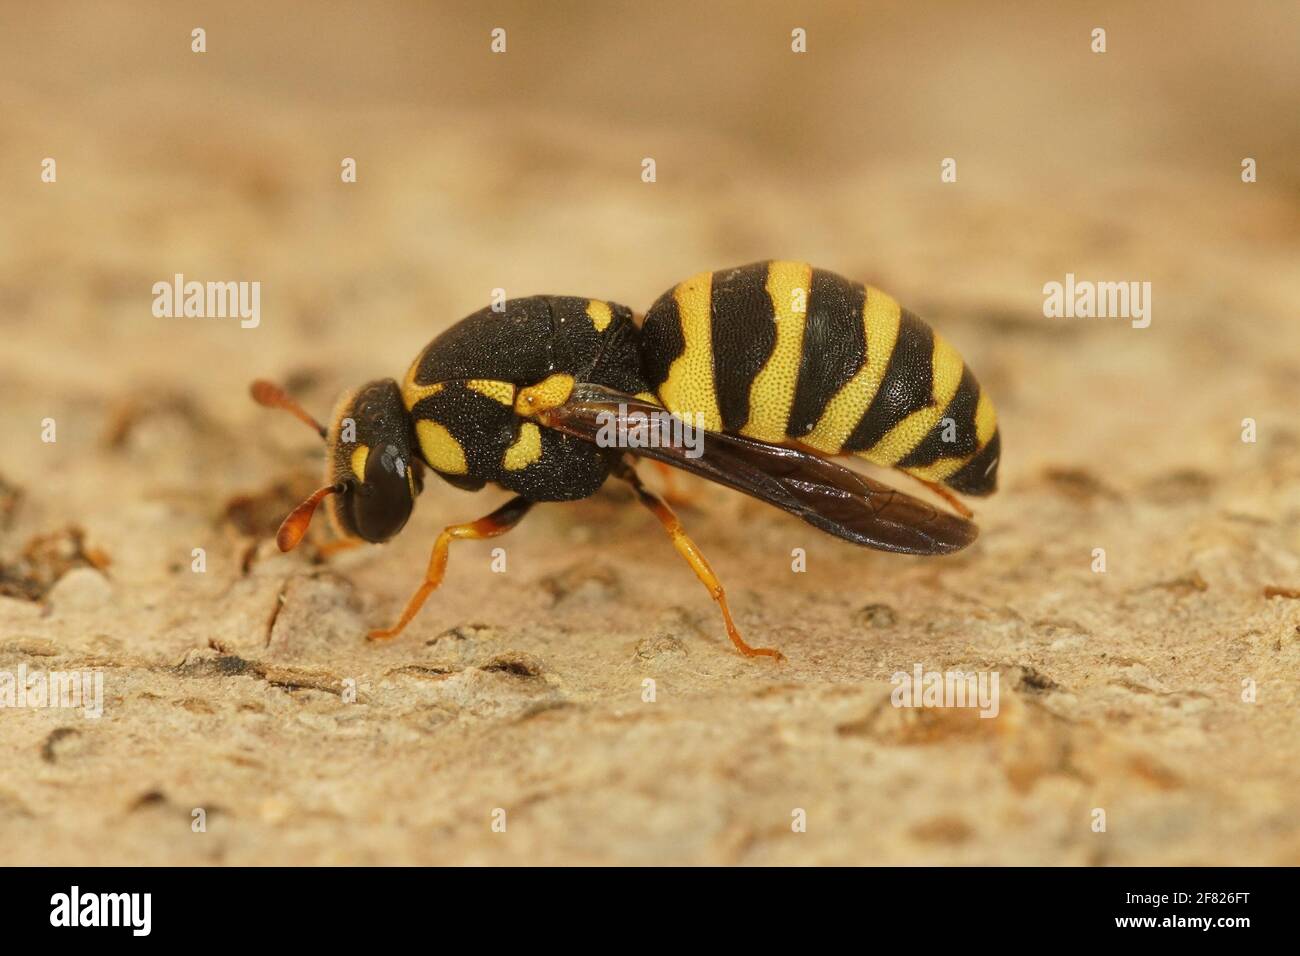 A closeup shot of a small wasp on the ground Stock Photo